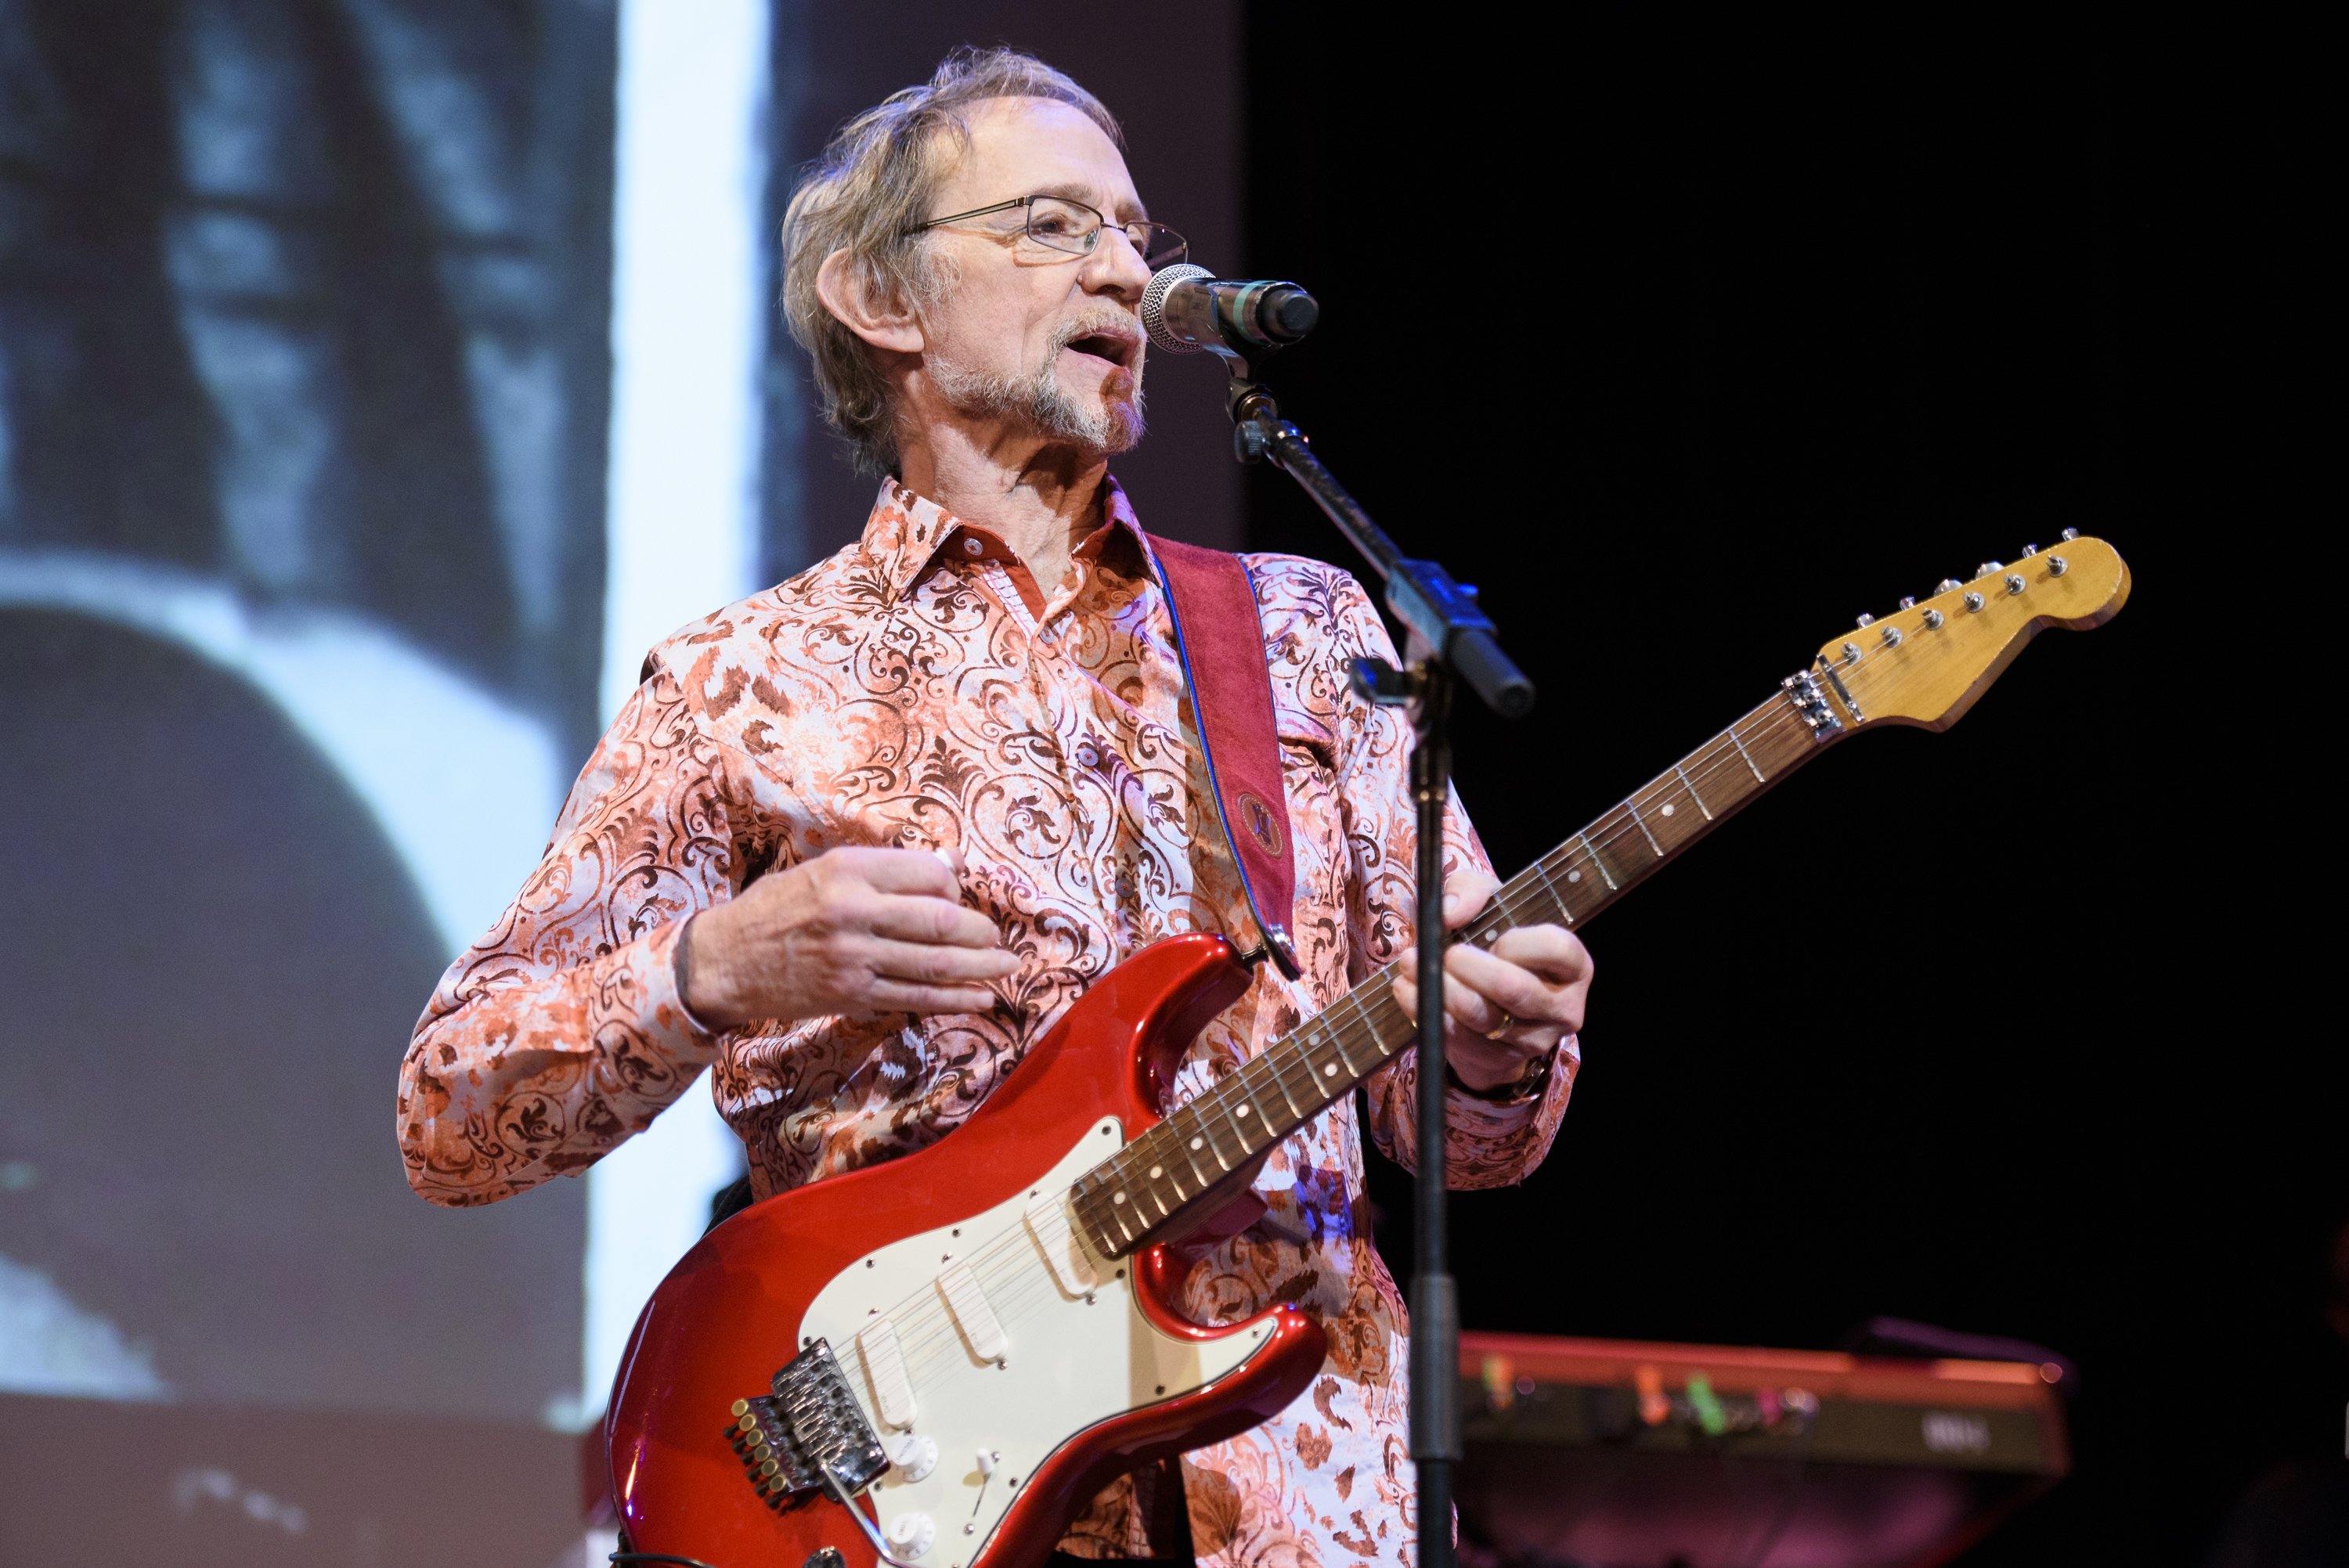 Peter Tork of The Monkees performs live on stage at Town Hall on June 1, 2016 in New York City. | Source: Getty Images